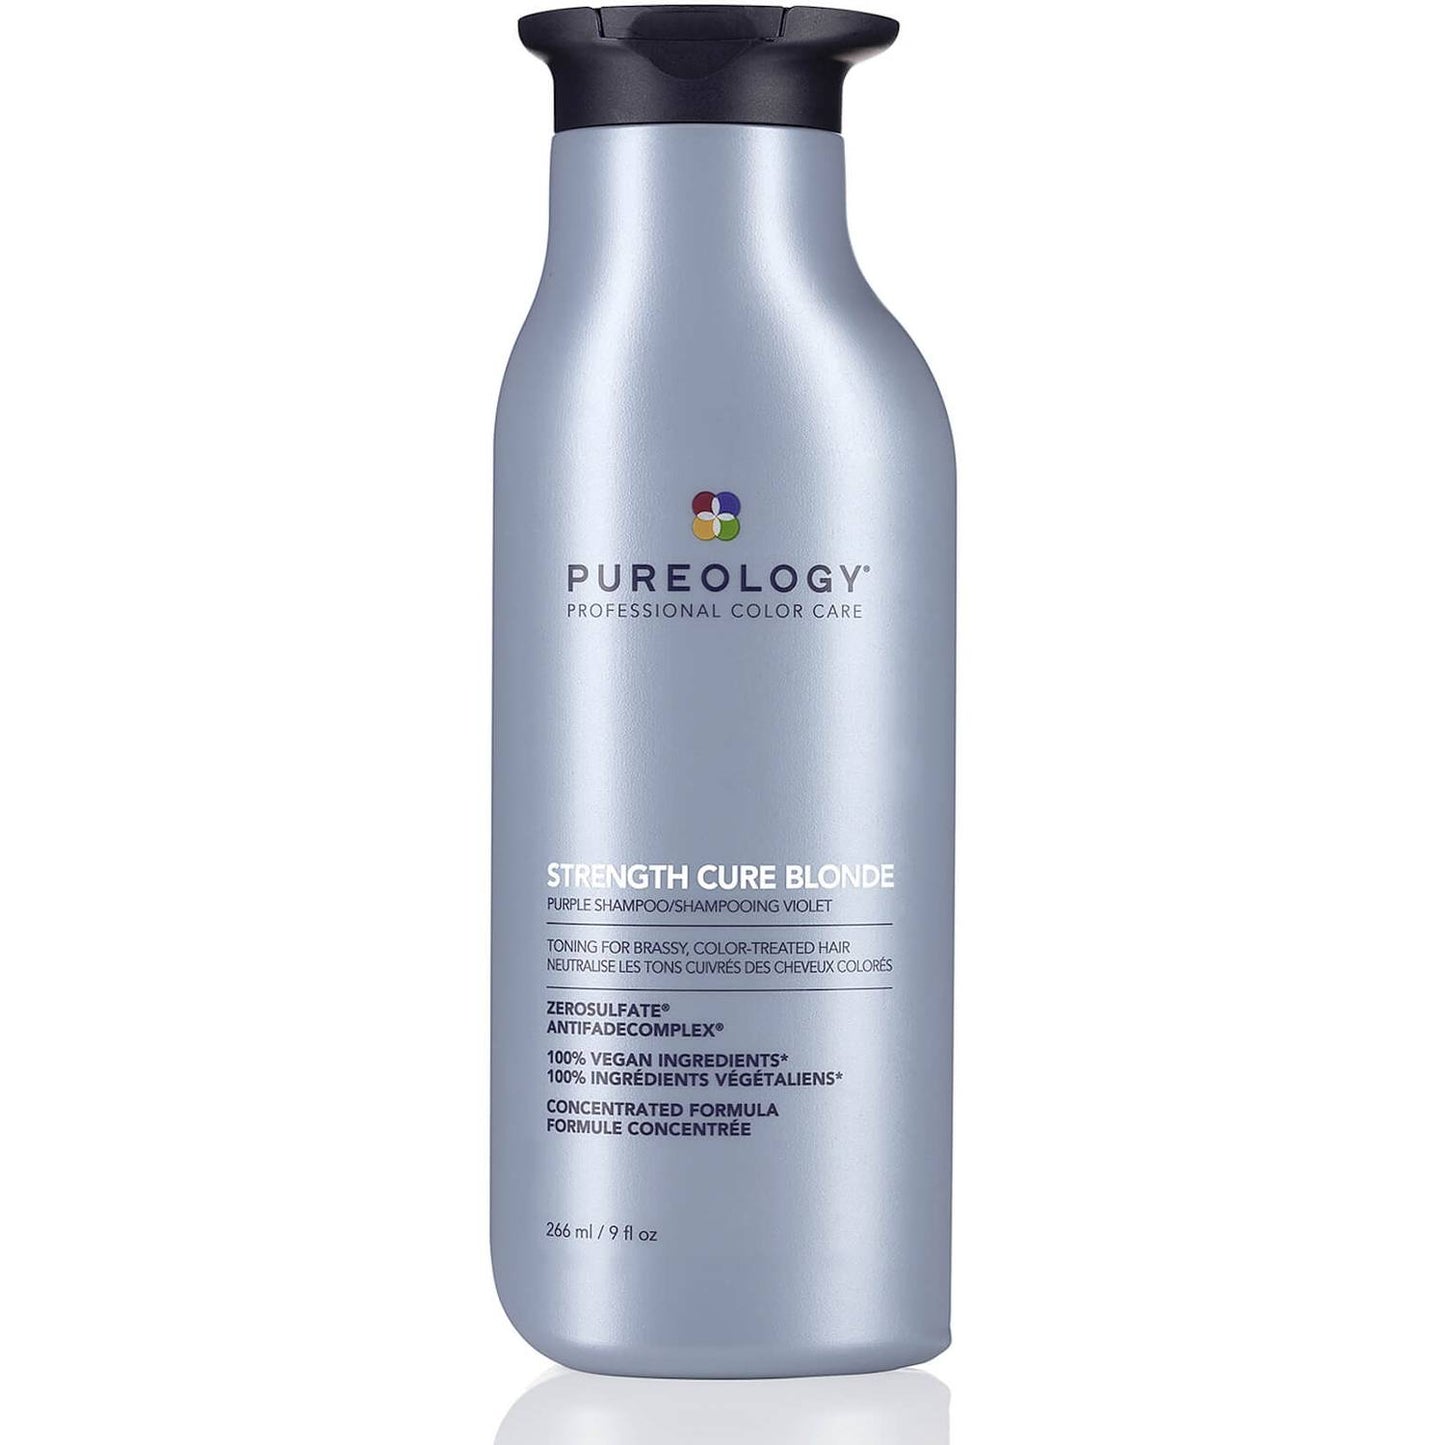 Pureology Strength Cure Blonde Shampoo 266ml - shelley and co